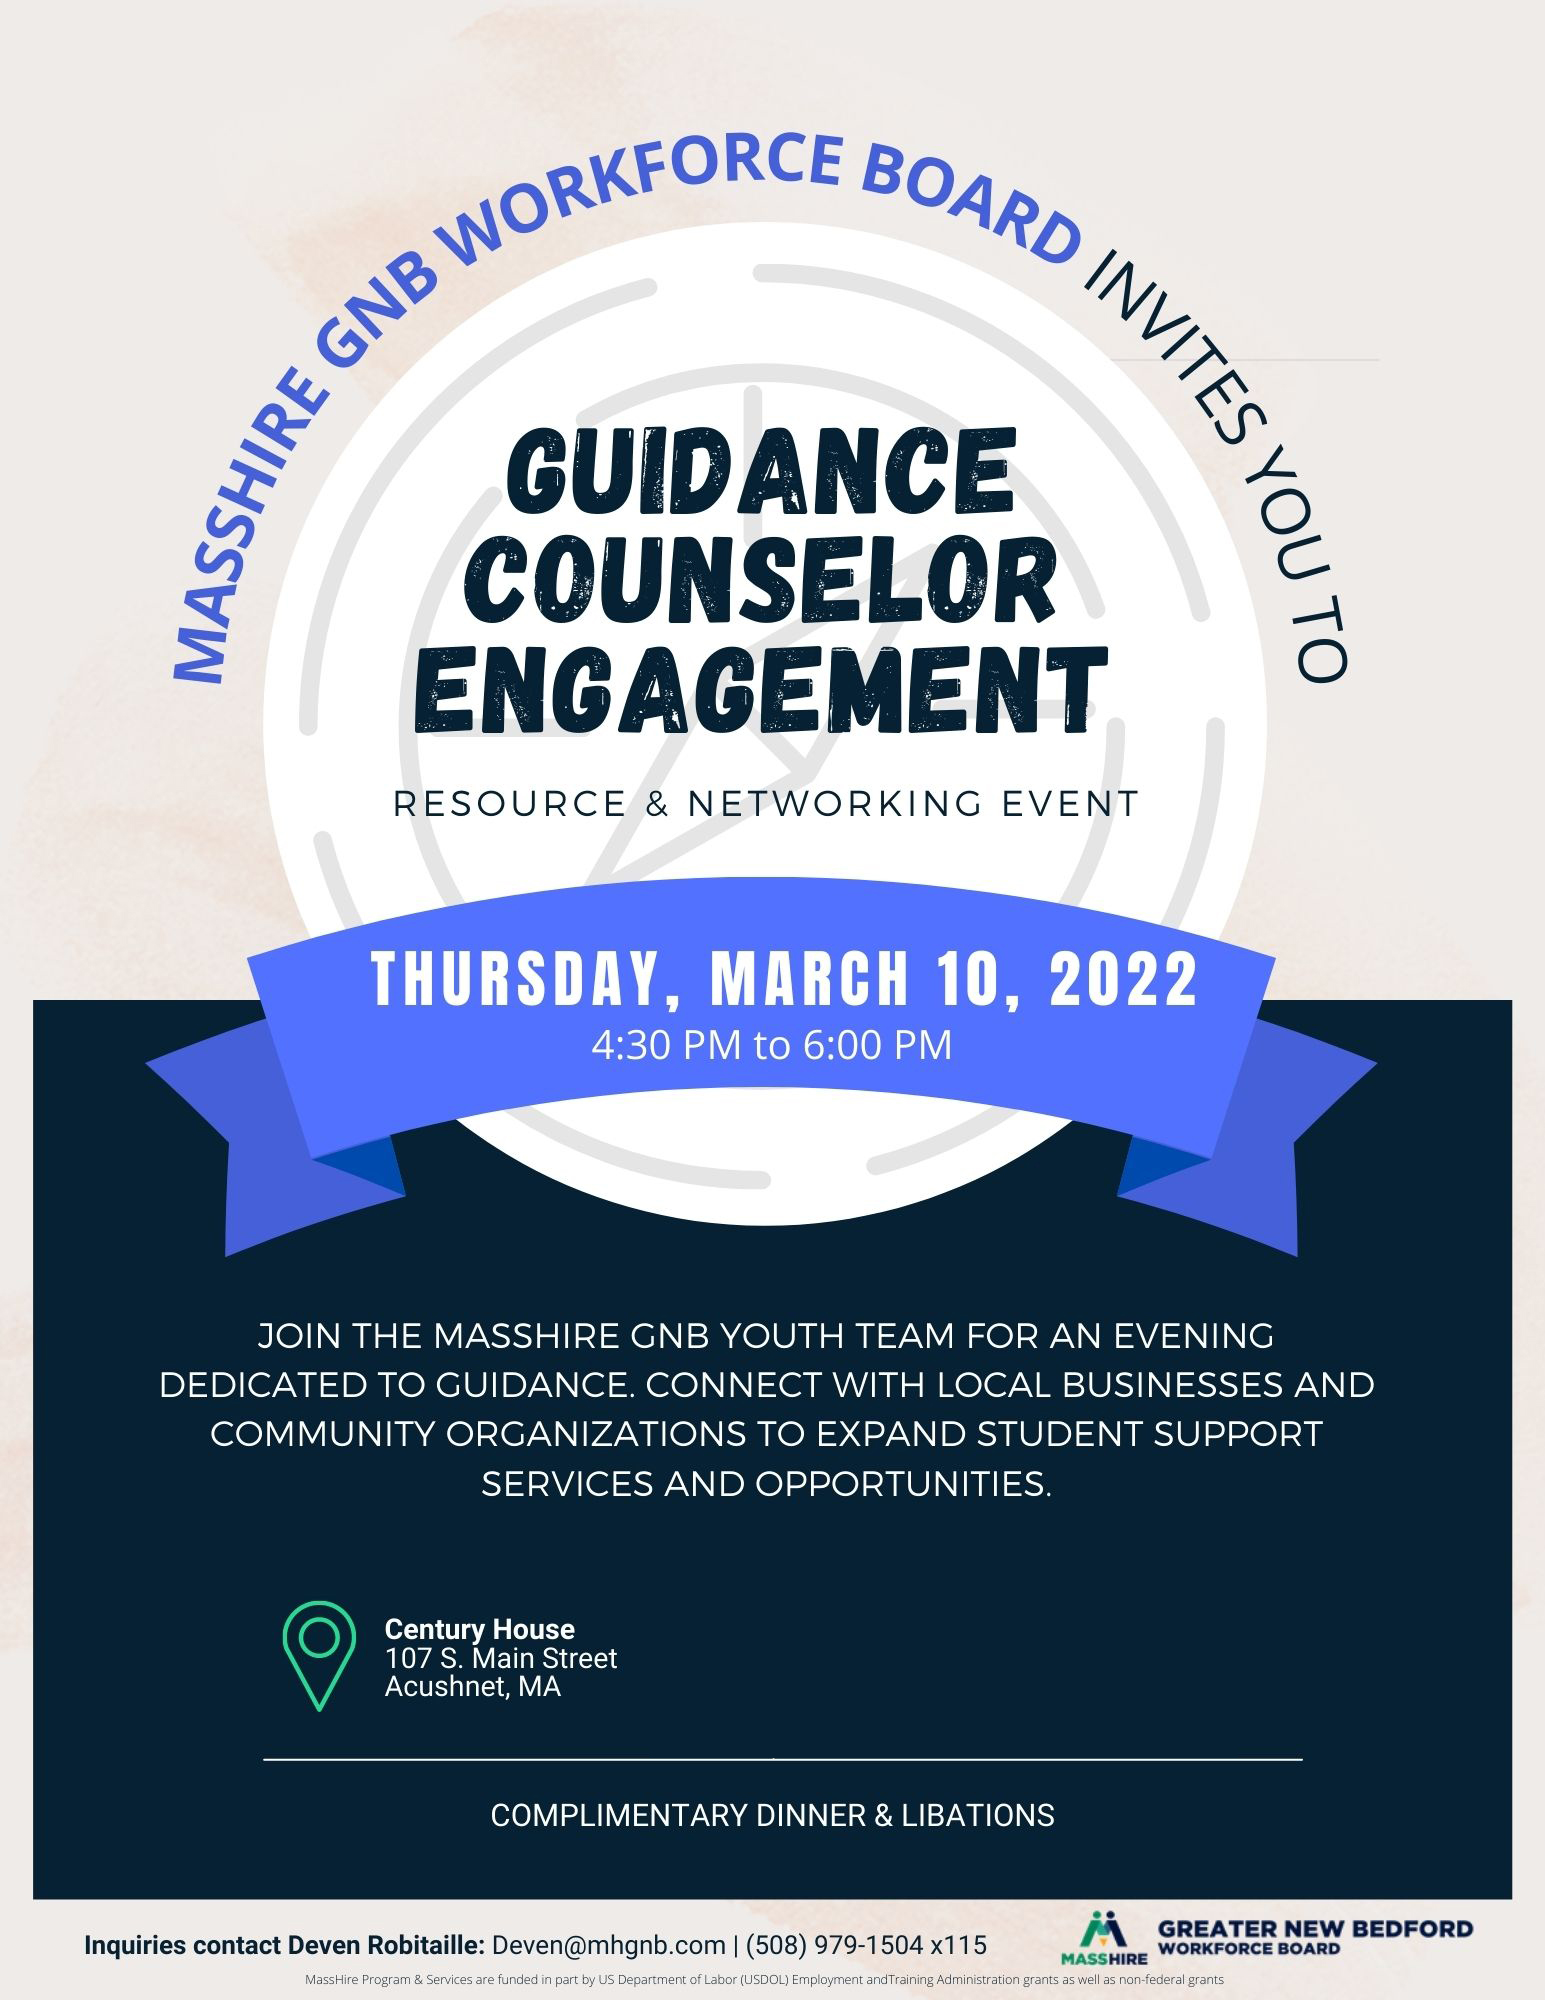 Youth Team Guidance Counselor Engagement Resource & Networking Evert